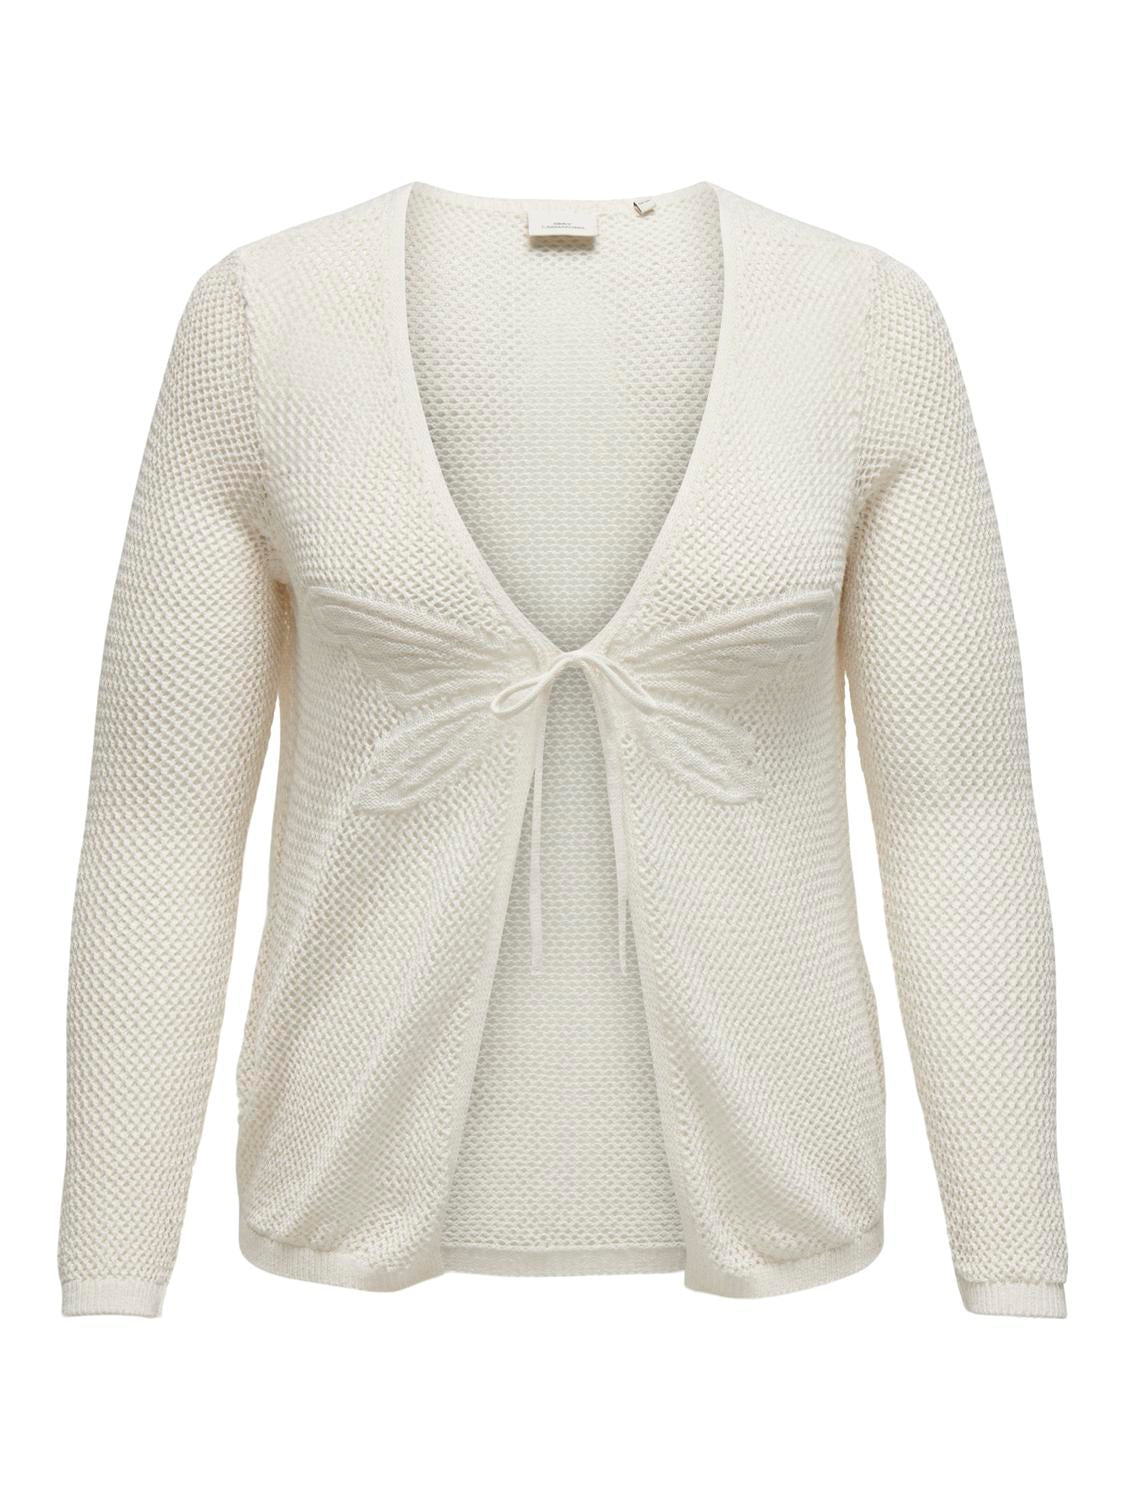 Only Carmakoma Belli Butterfly Cardigan in Cream